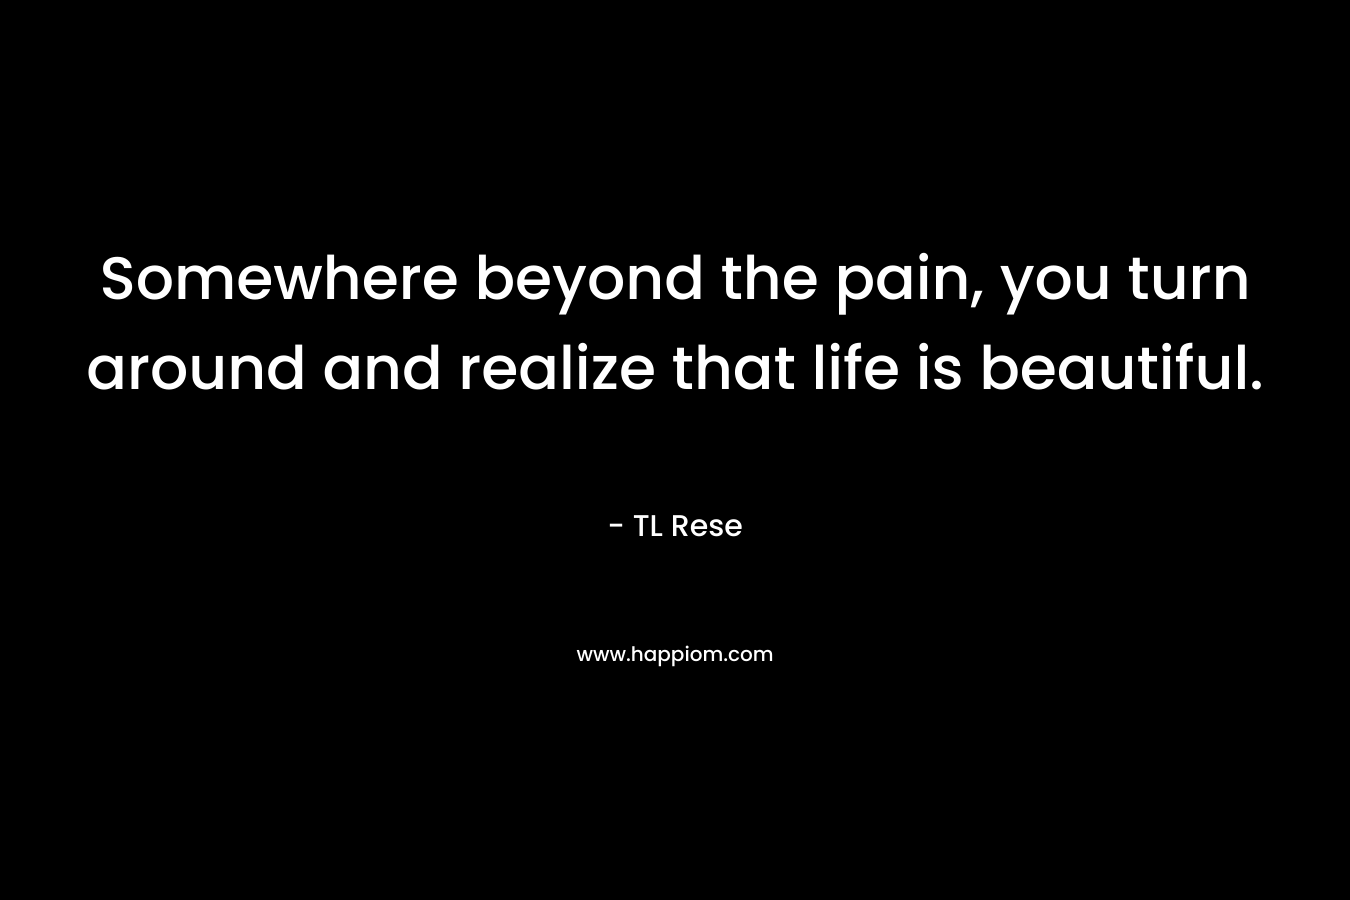 Somewhere beyond the pain, you turn around and realize that life is beautiful.